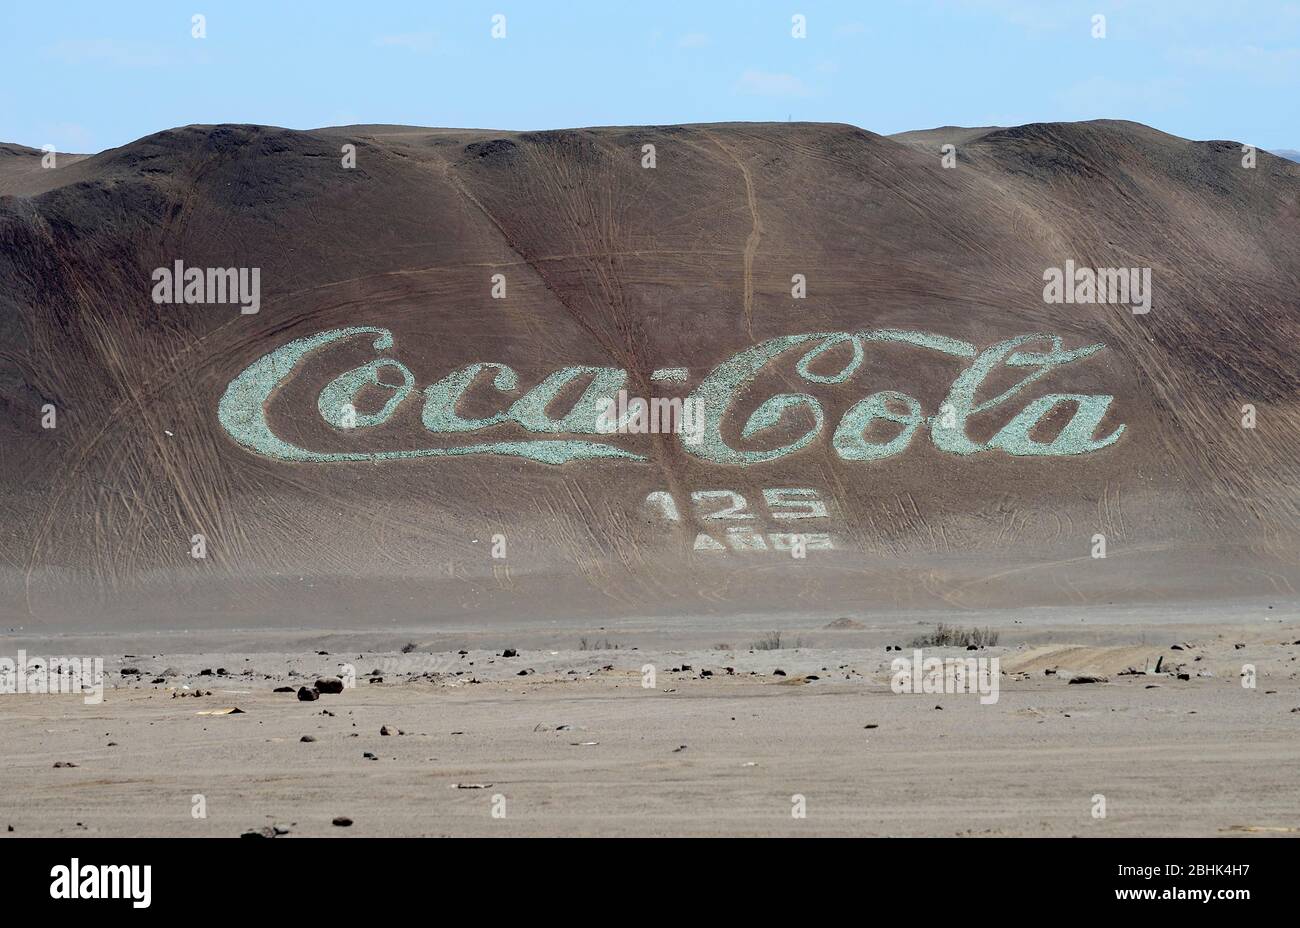 The largest Coca Cola logo in the world, made from old bottles, near Arica, Arica y Parinacota region, Chile Stock Photo